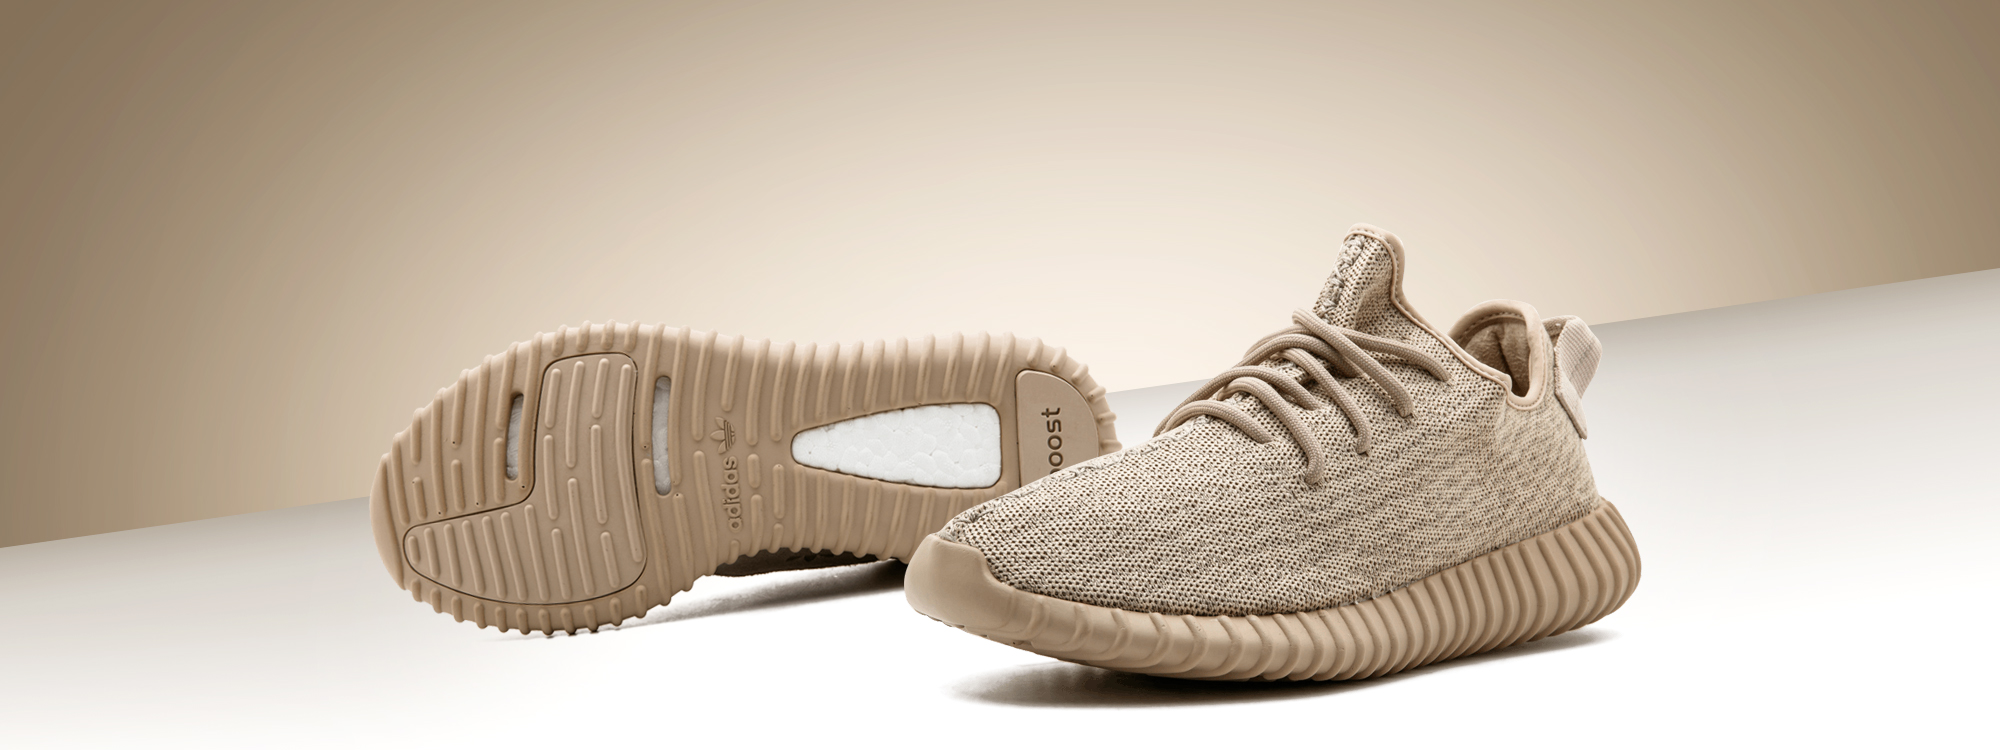 real cheap  Yeezy Boost  350 Oxford Tan for sale